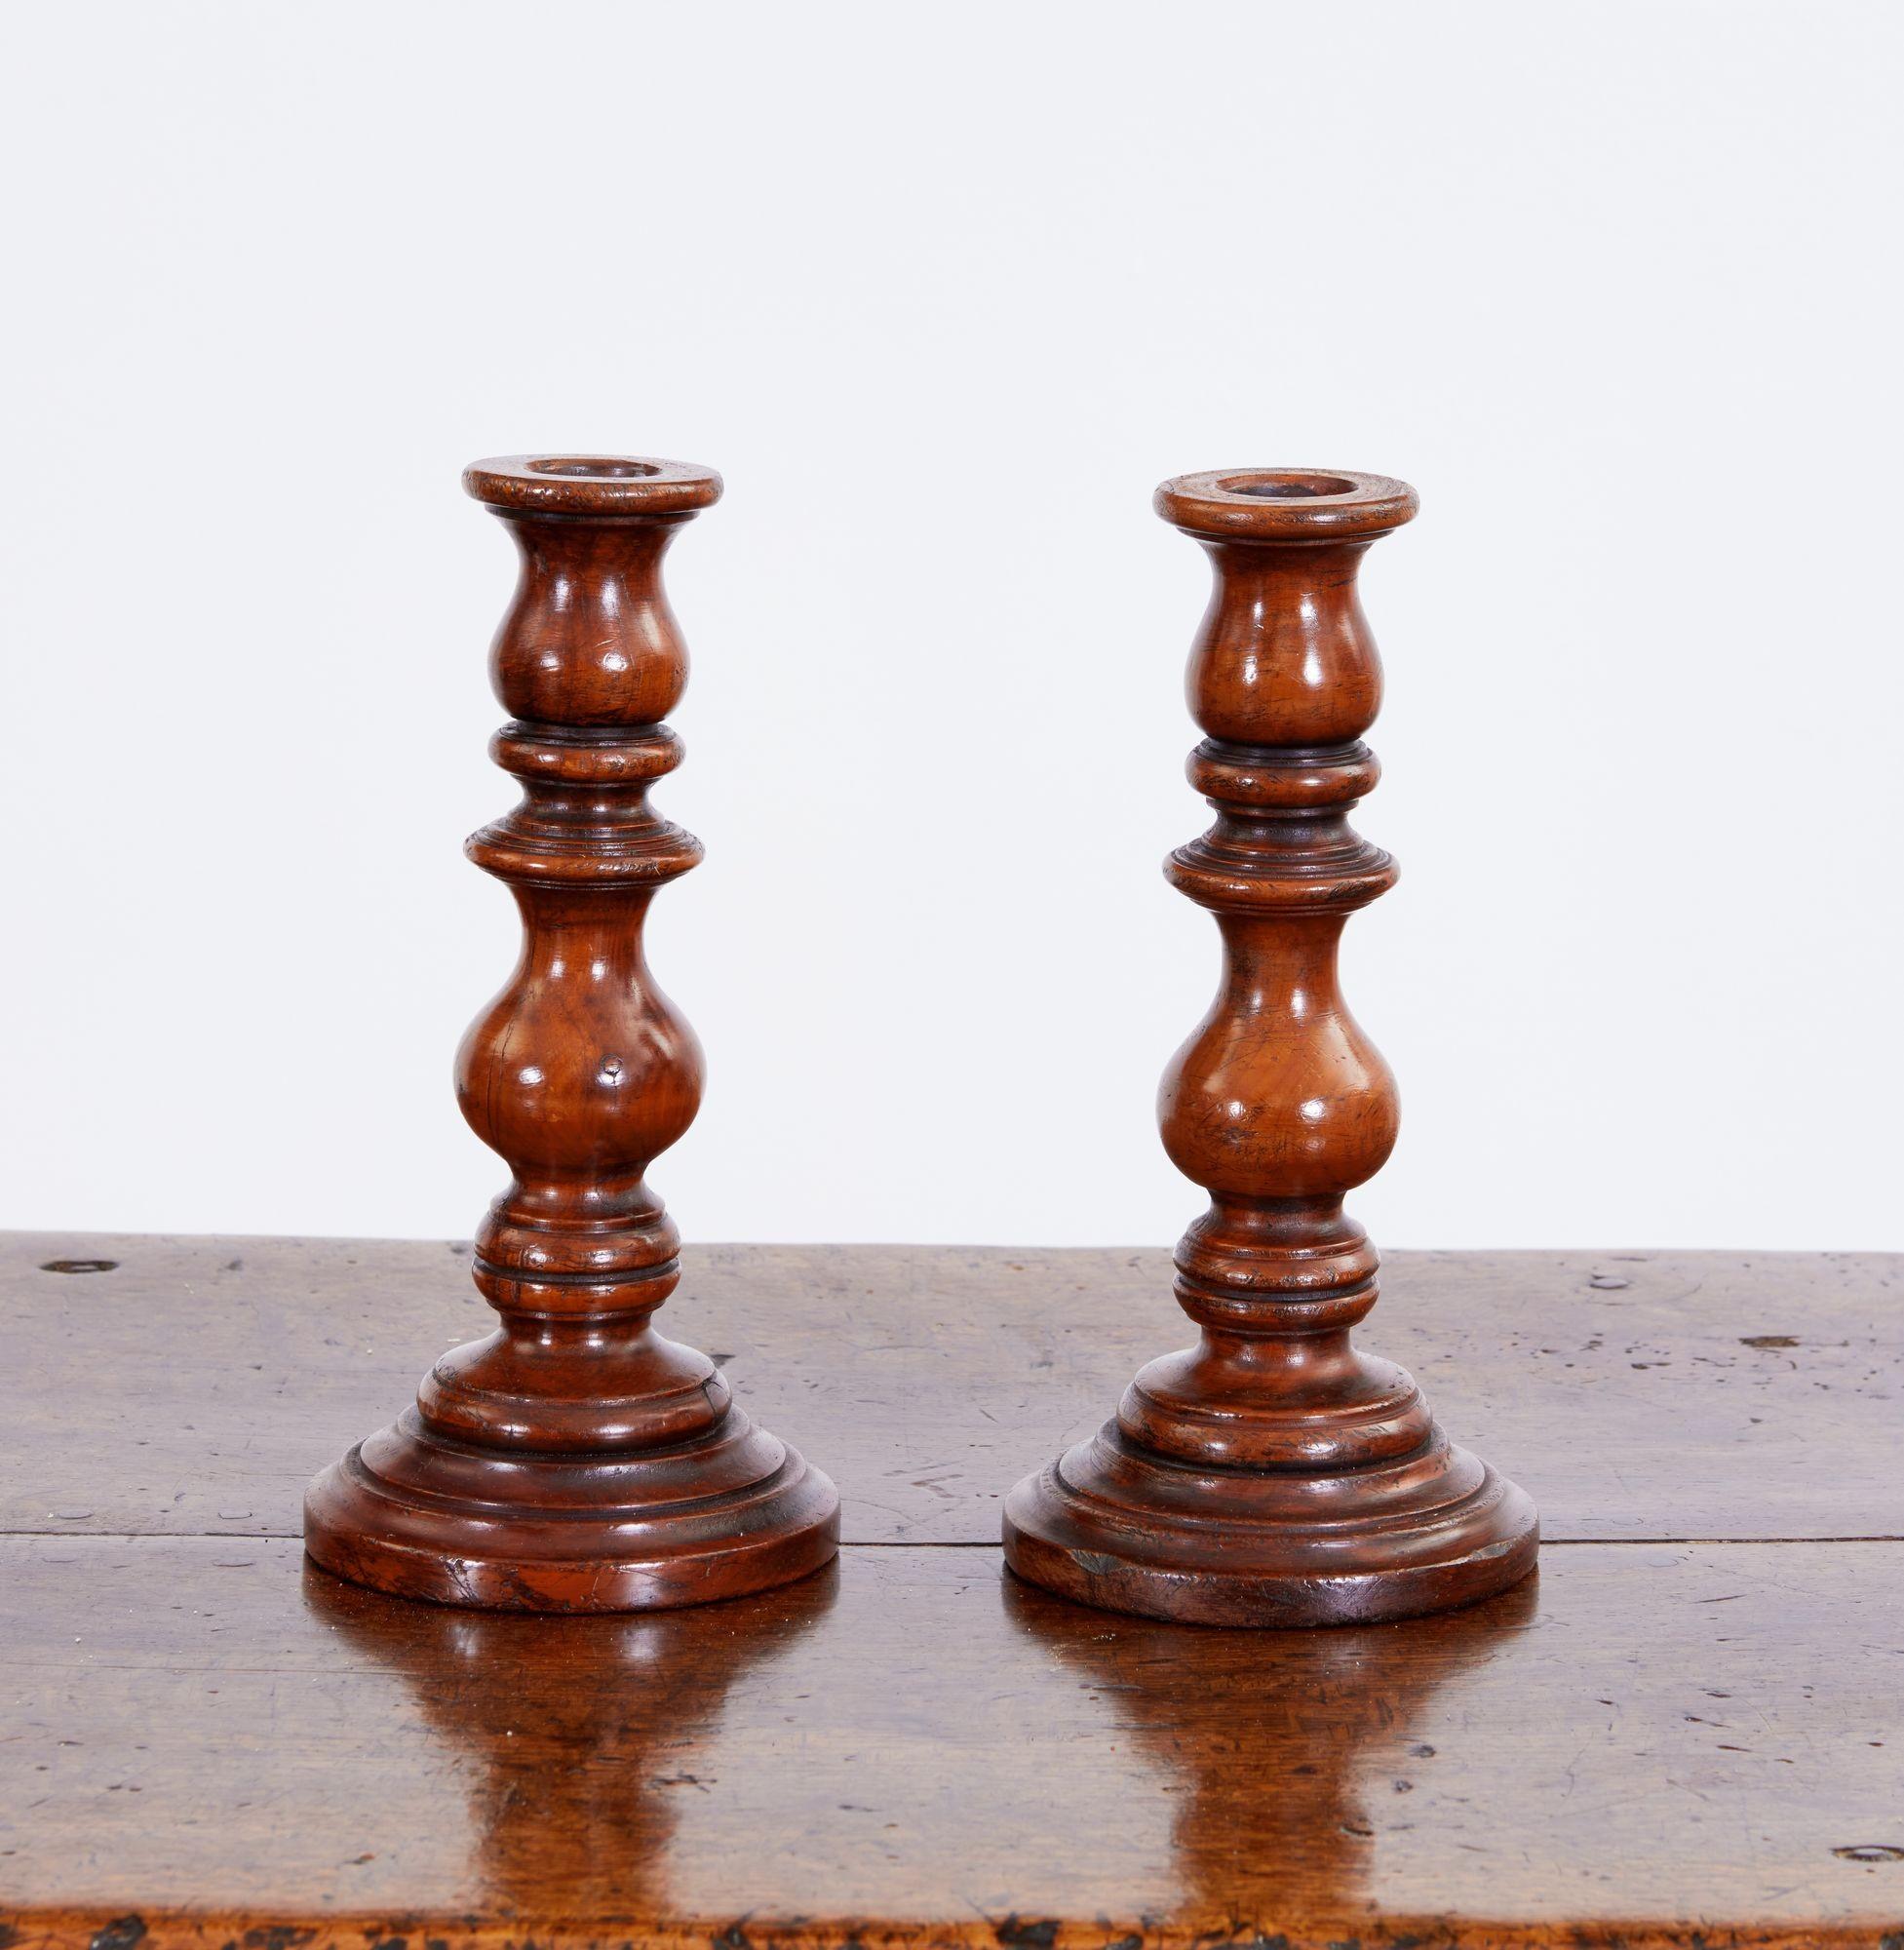 Fine pair of English 19th century turned fruitwood treen candlesticks having vase and reel form on stepped ring turned bases, possessing very good rich color and patination.